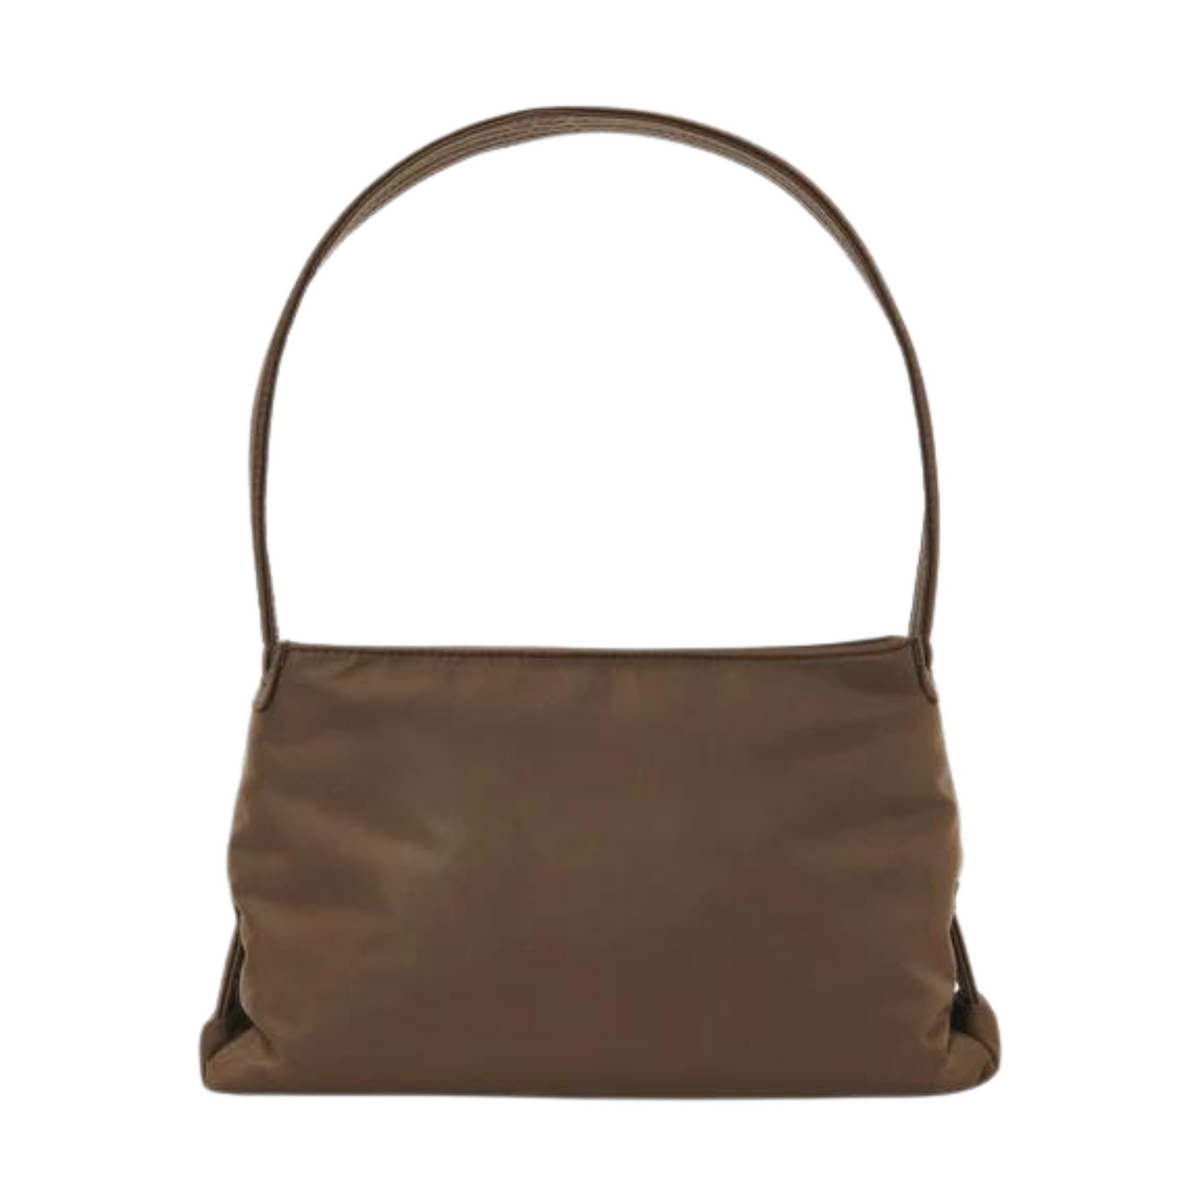 SCAPE TWILL BAG - CHOCOLATE BROWN